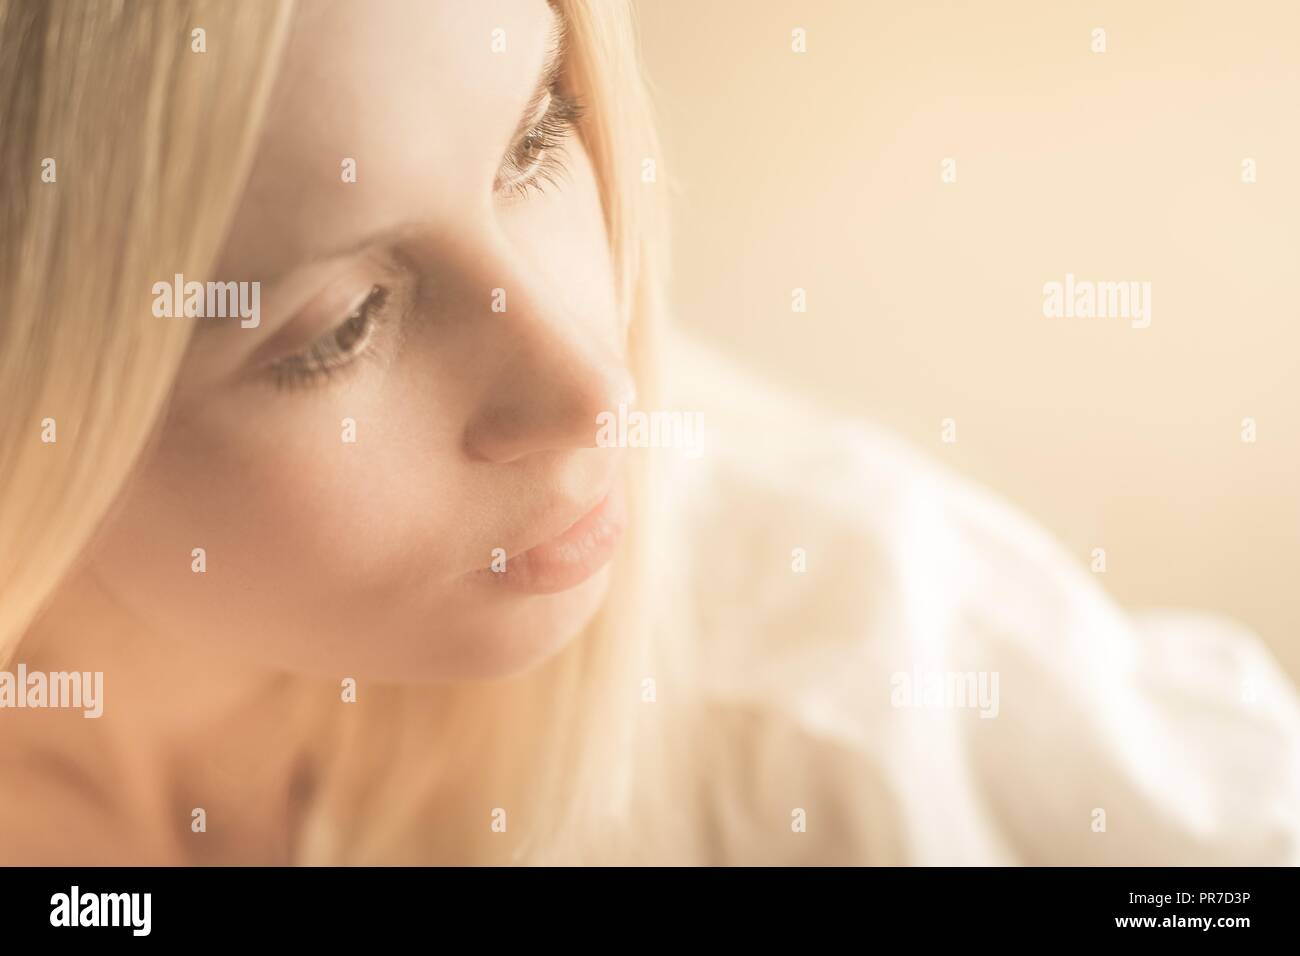 close-up portrait in a profile of a blonde girl with a pensive look aside Stock Photo